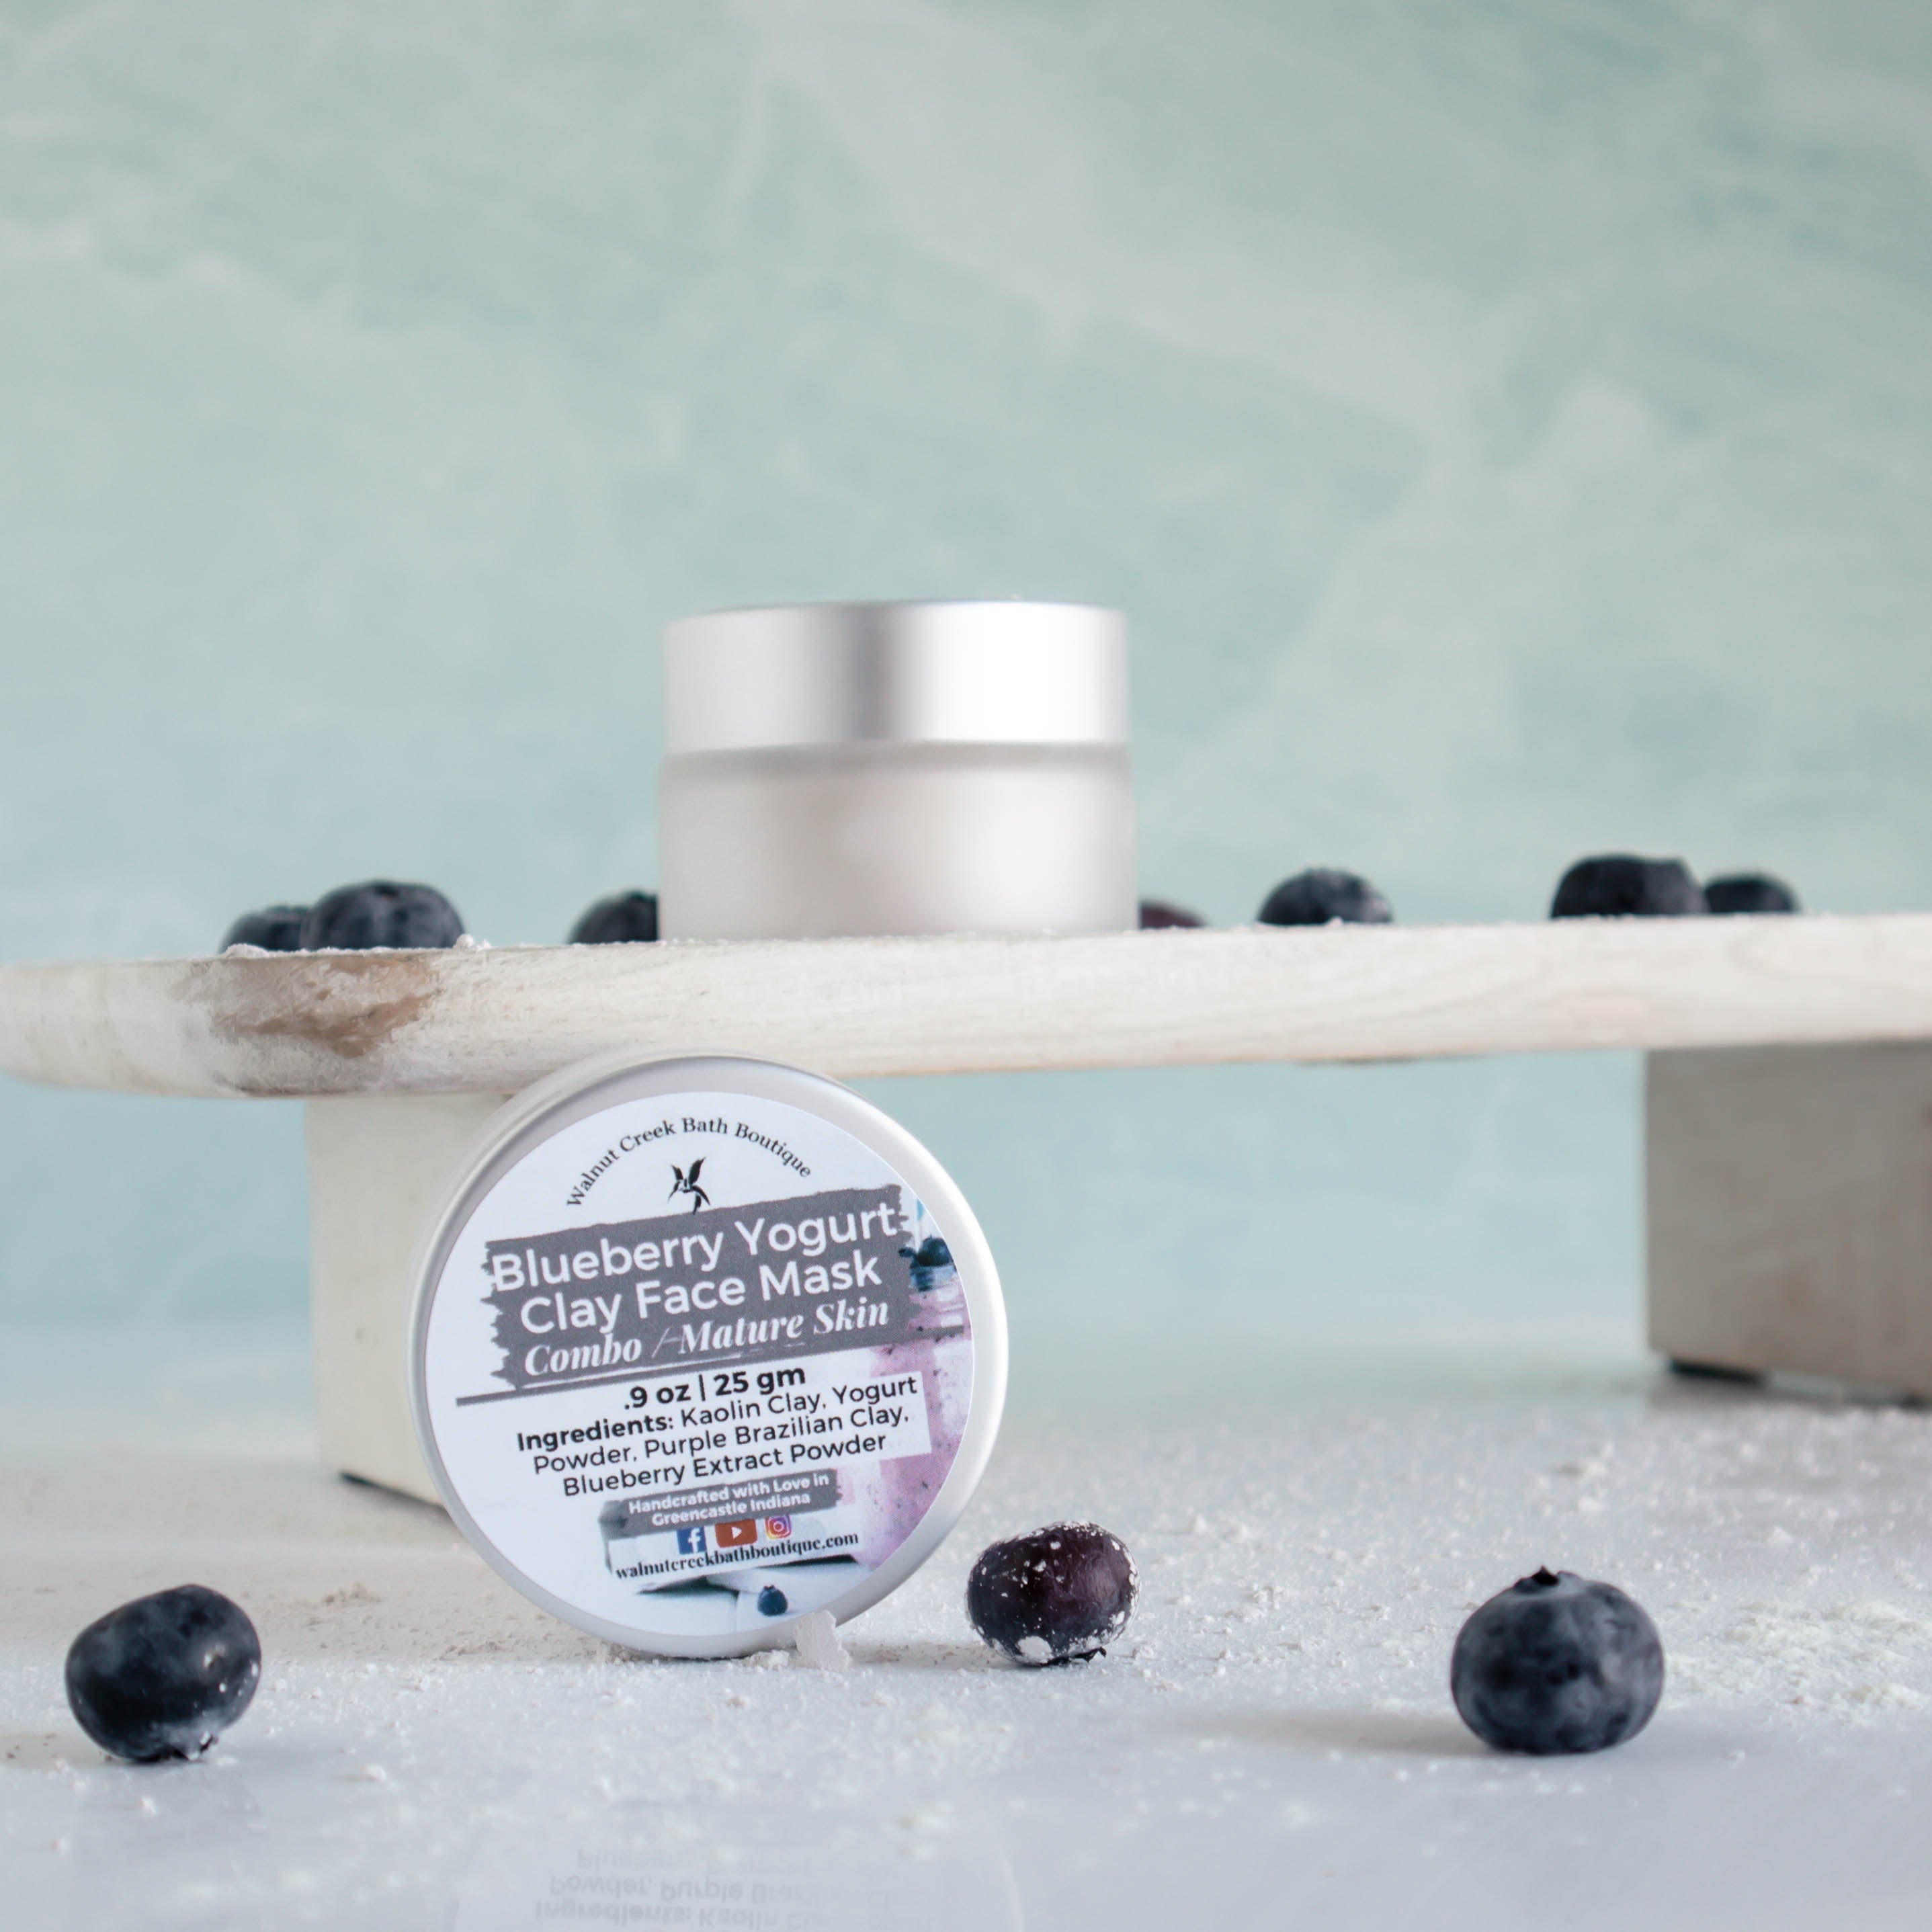 Blueberry Yogurt clay mask jar sitting on its side with another on a wooden board.. There is a dusting of clay mask powder and random blueberries surrounding all the items.